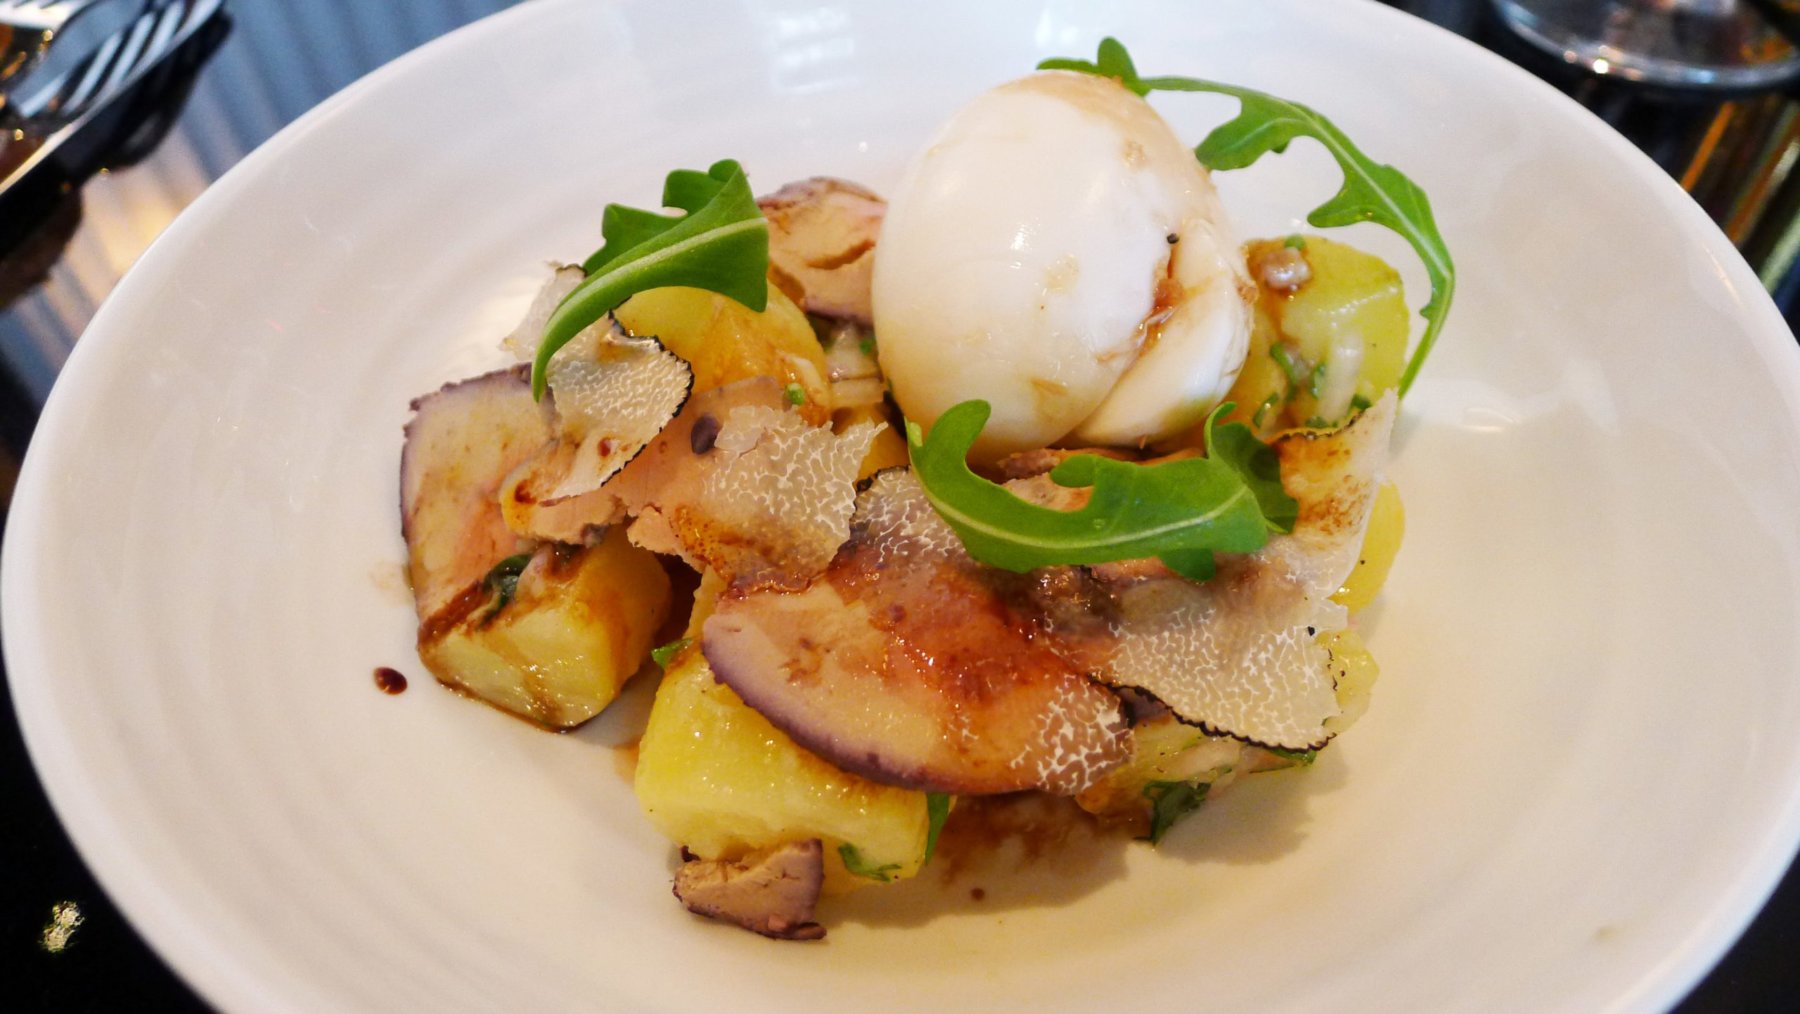 potatoes salad with foie gras, soft boiled egg and summer truffles shavings